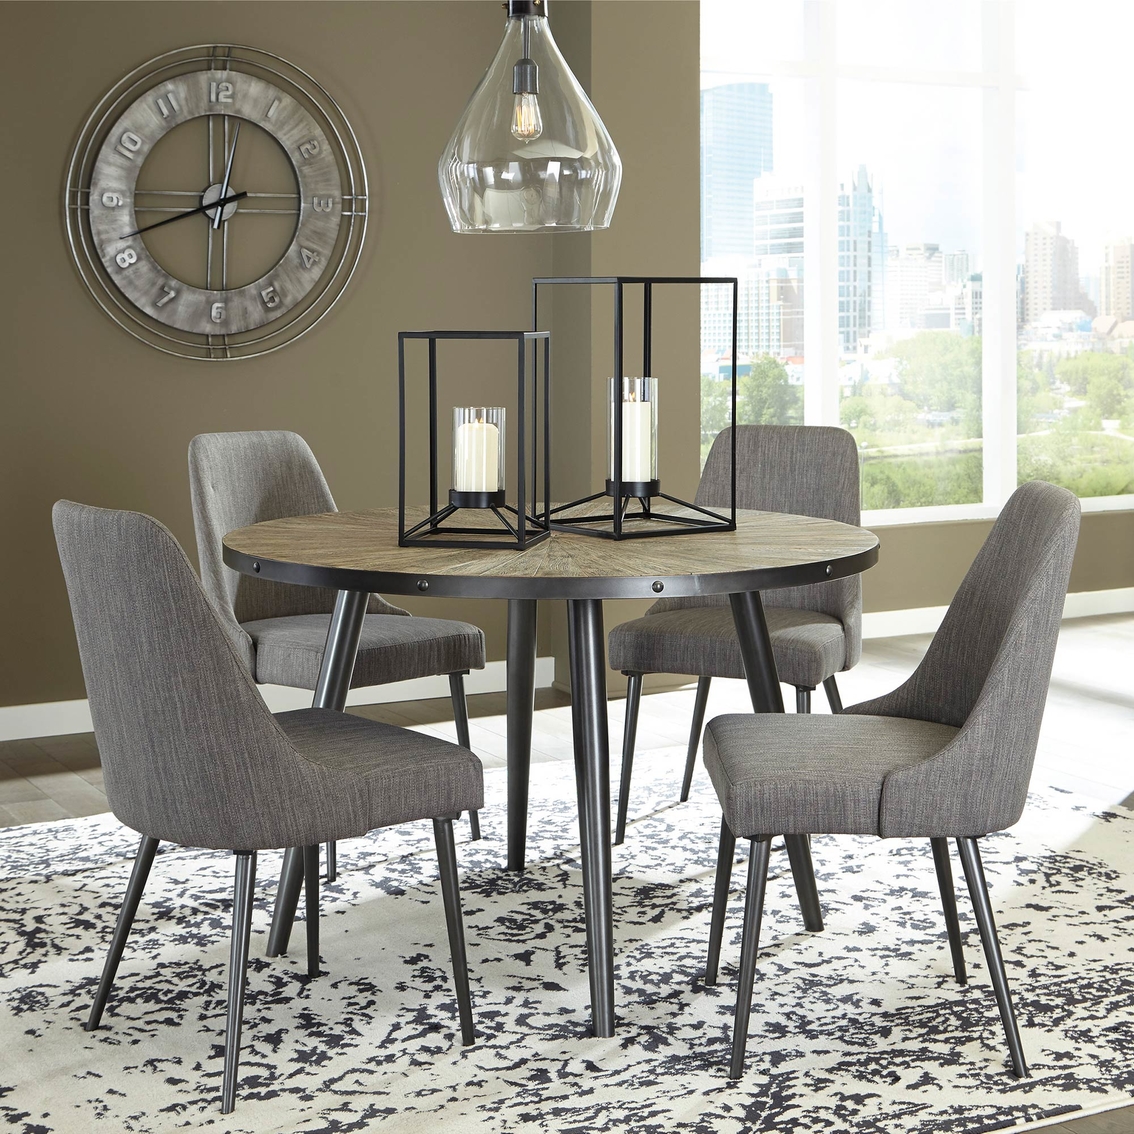 Signature Design by Ashley Coverty Upholstered Dining Side Chair 2 pk. - Image 3 of 3